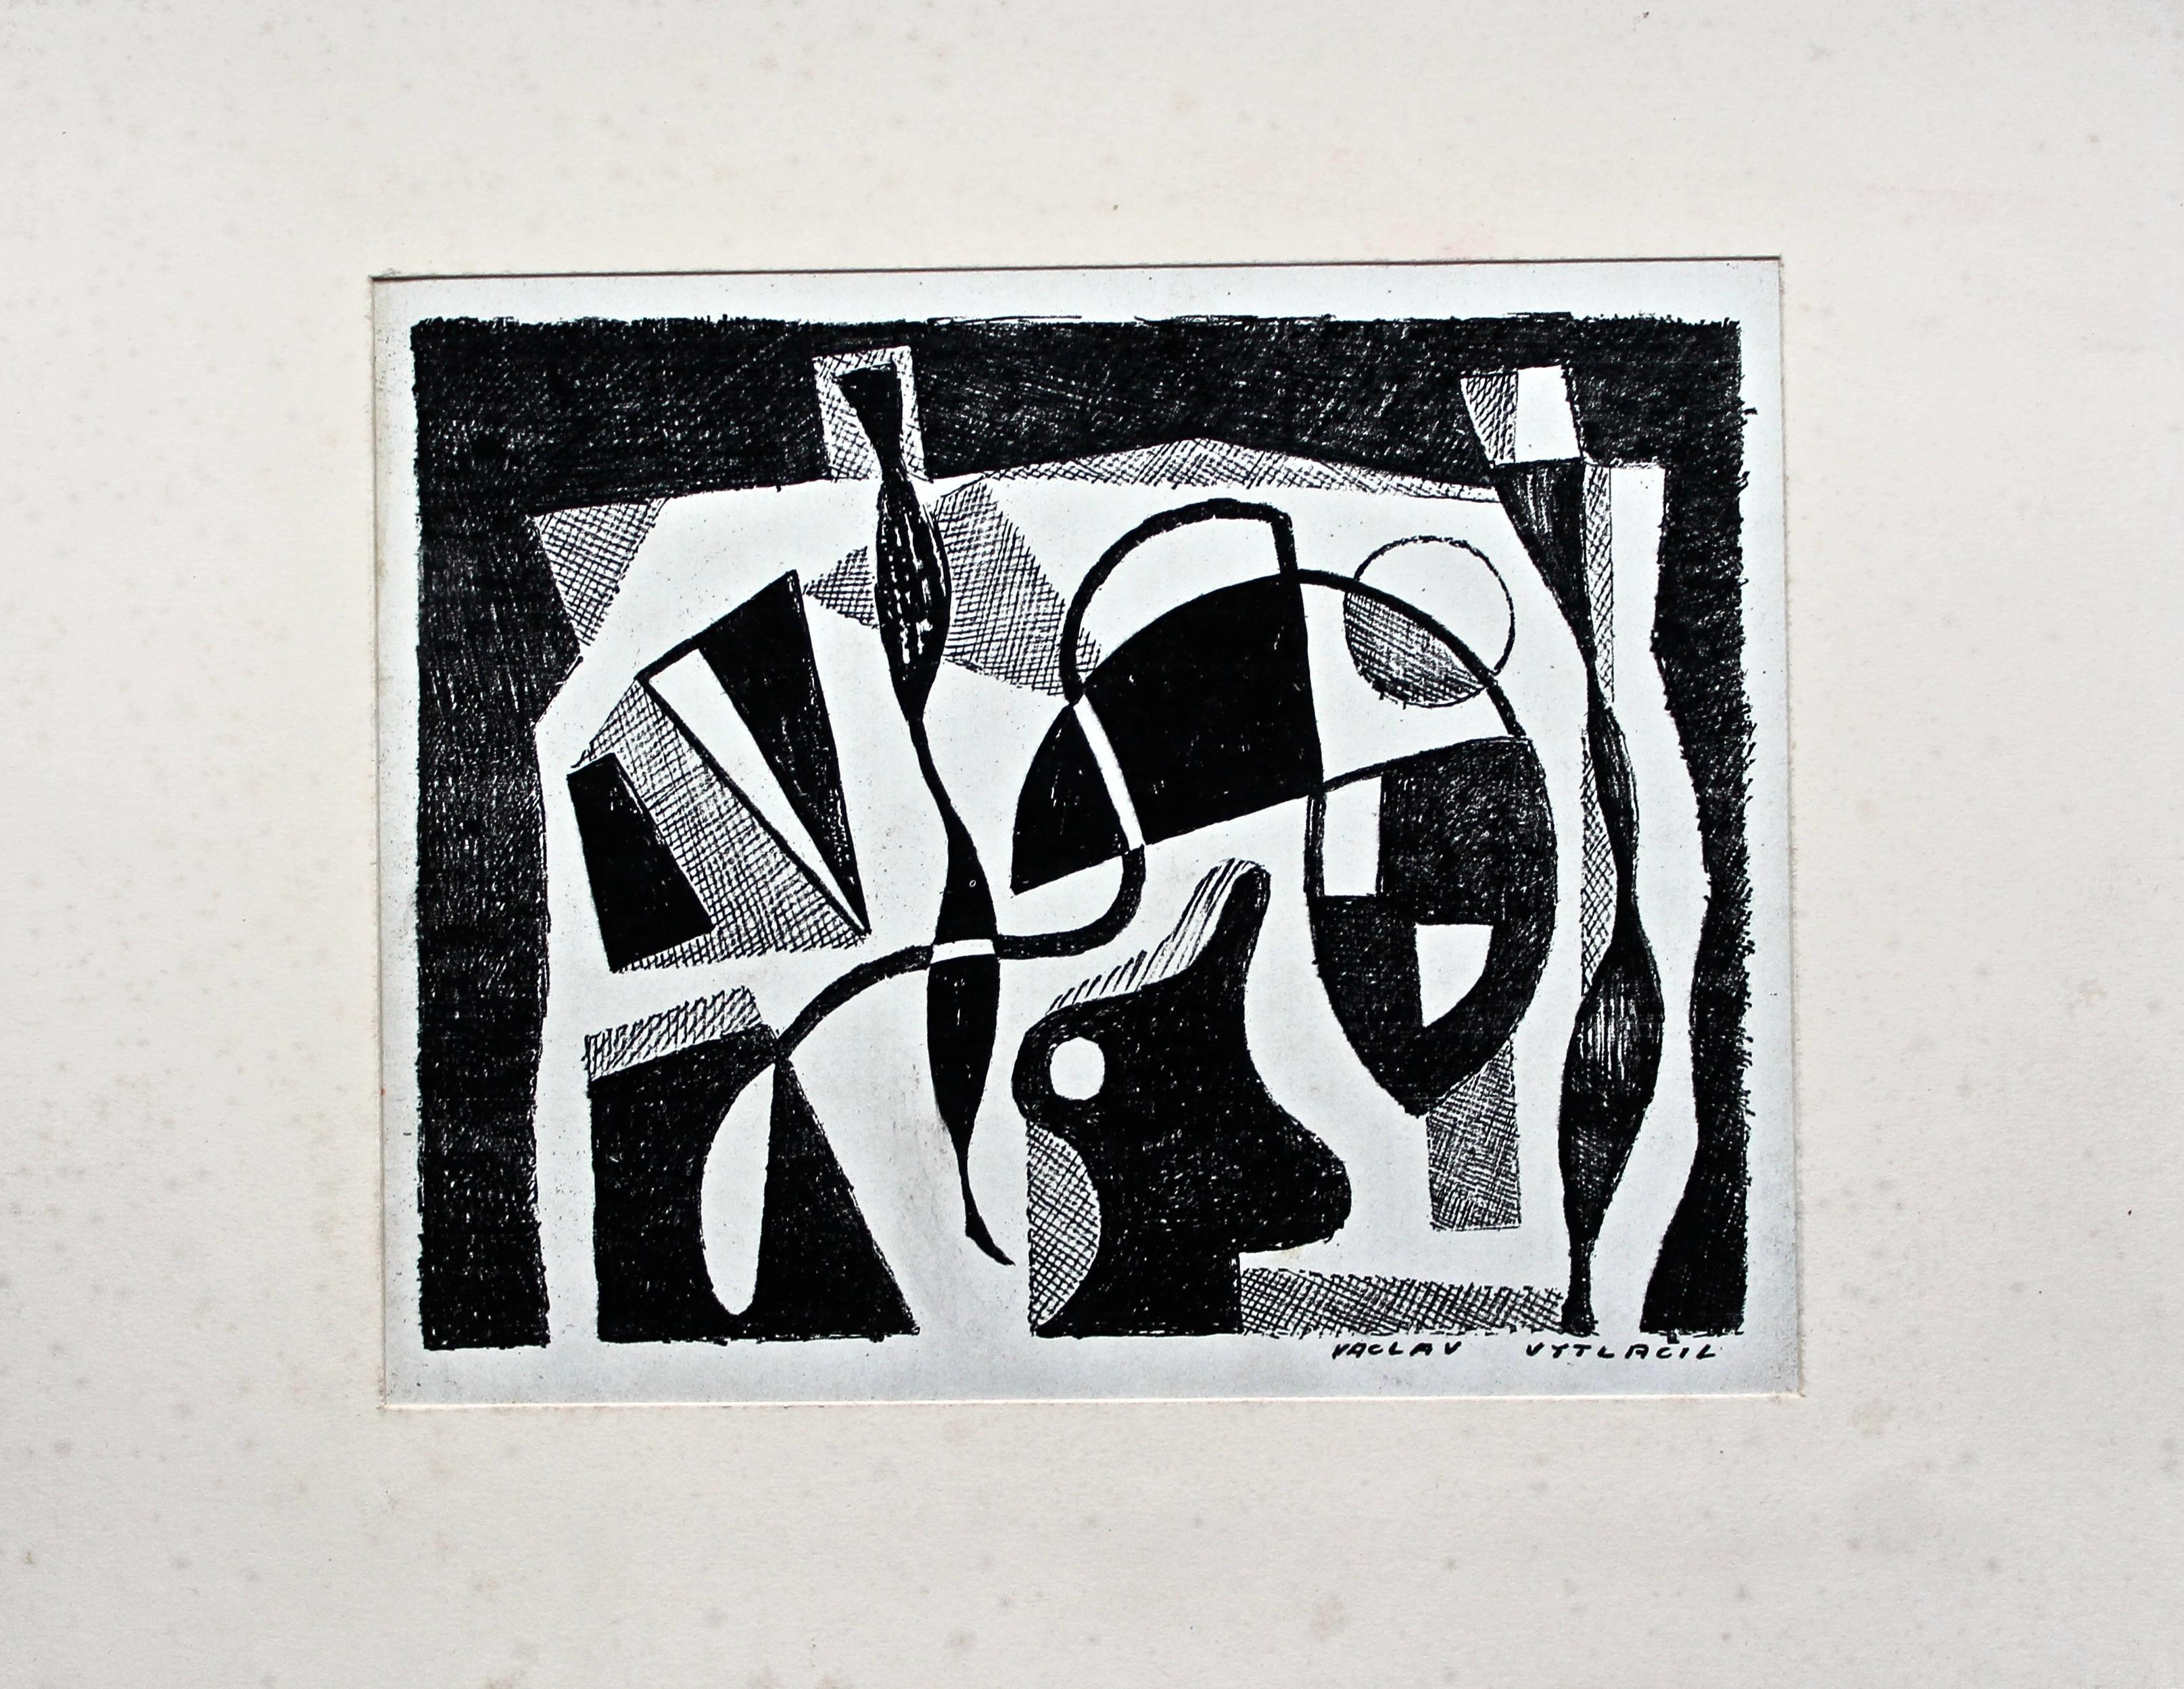 Original Vaclav Vytlacil lithograph, printed offset, signed in the plate. Published 1937, as part of portfolio (approximate edition of 500) by The Squibb Gallery NYC, for the first exhibition of the AAA: American Abstract Artists. Image size: 7 x